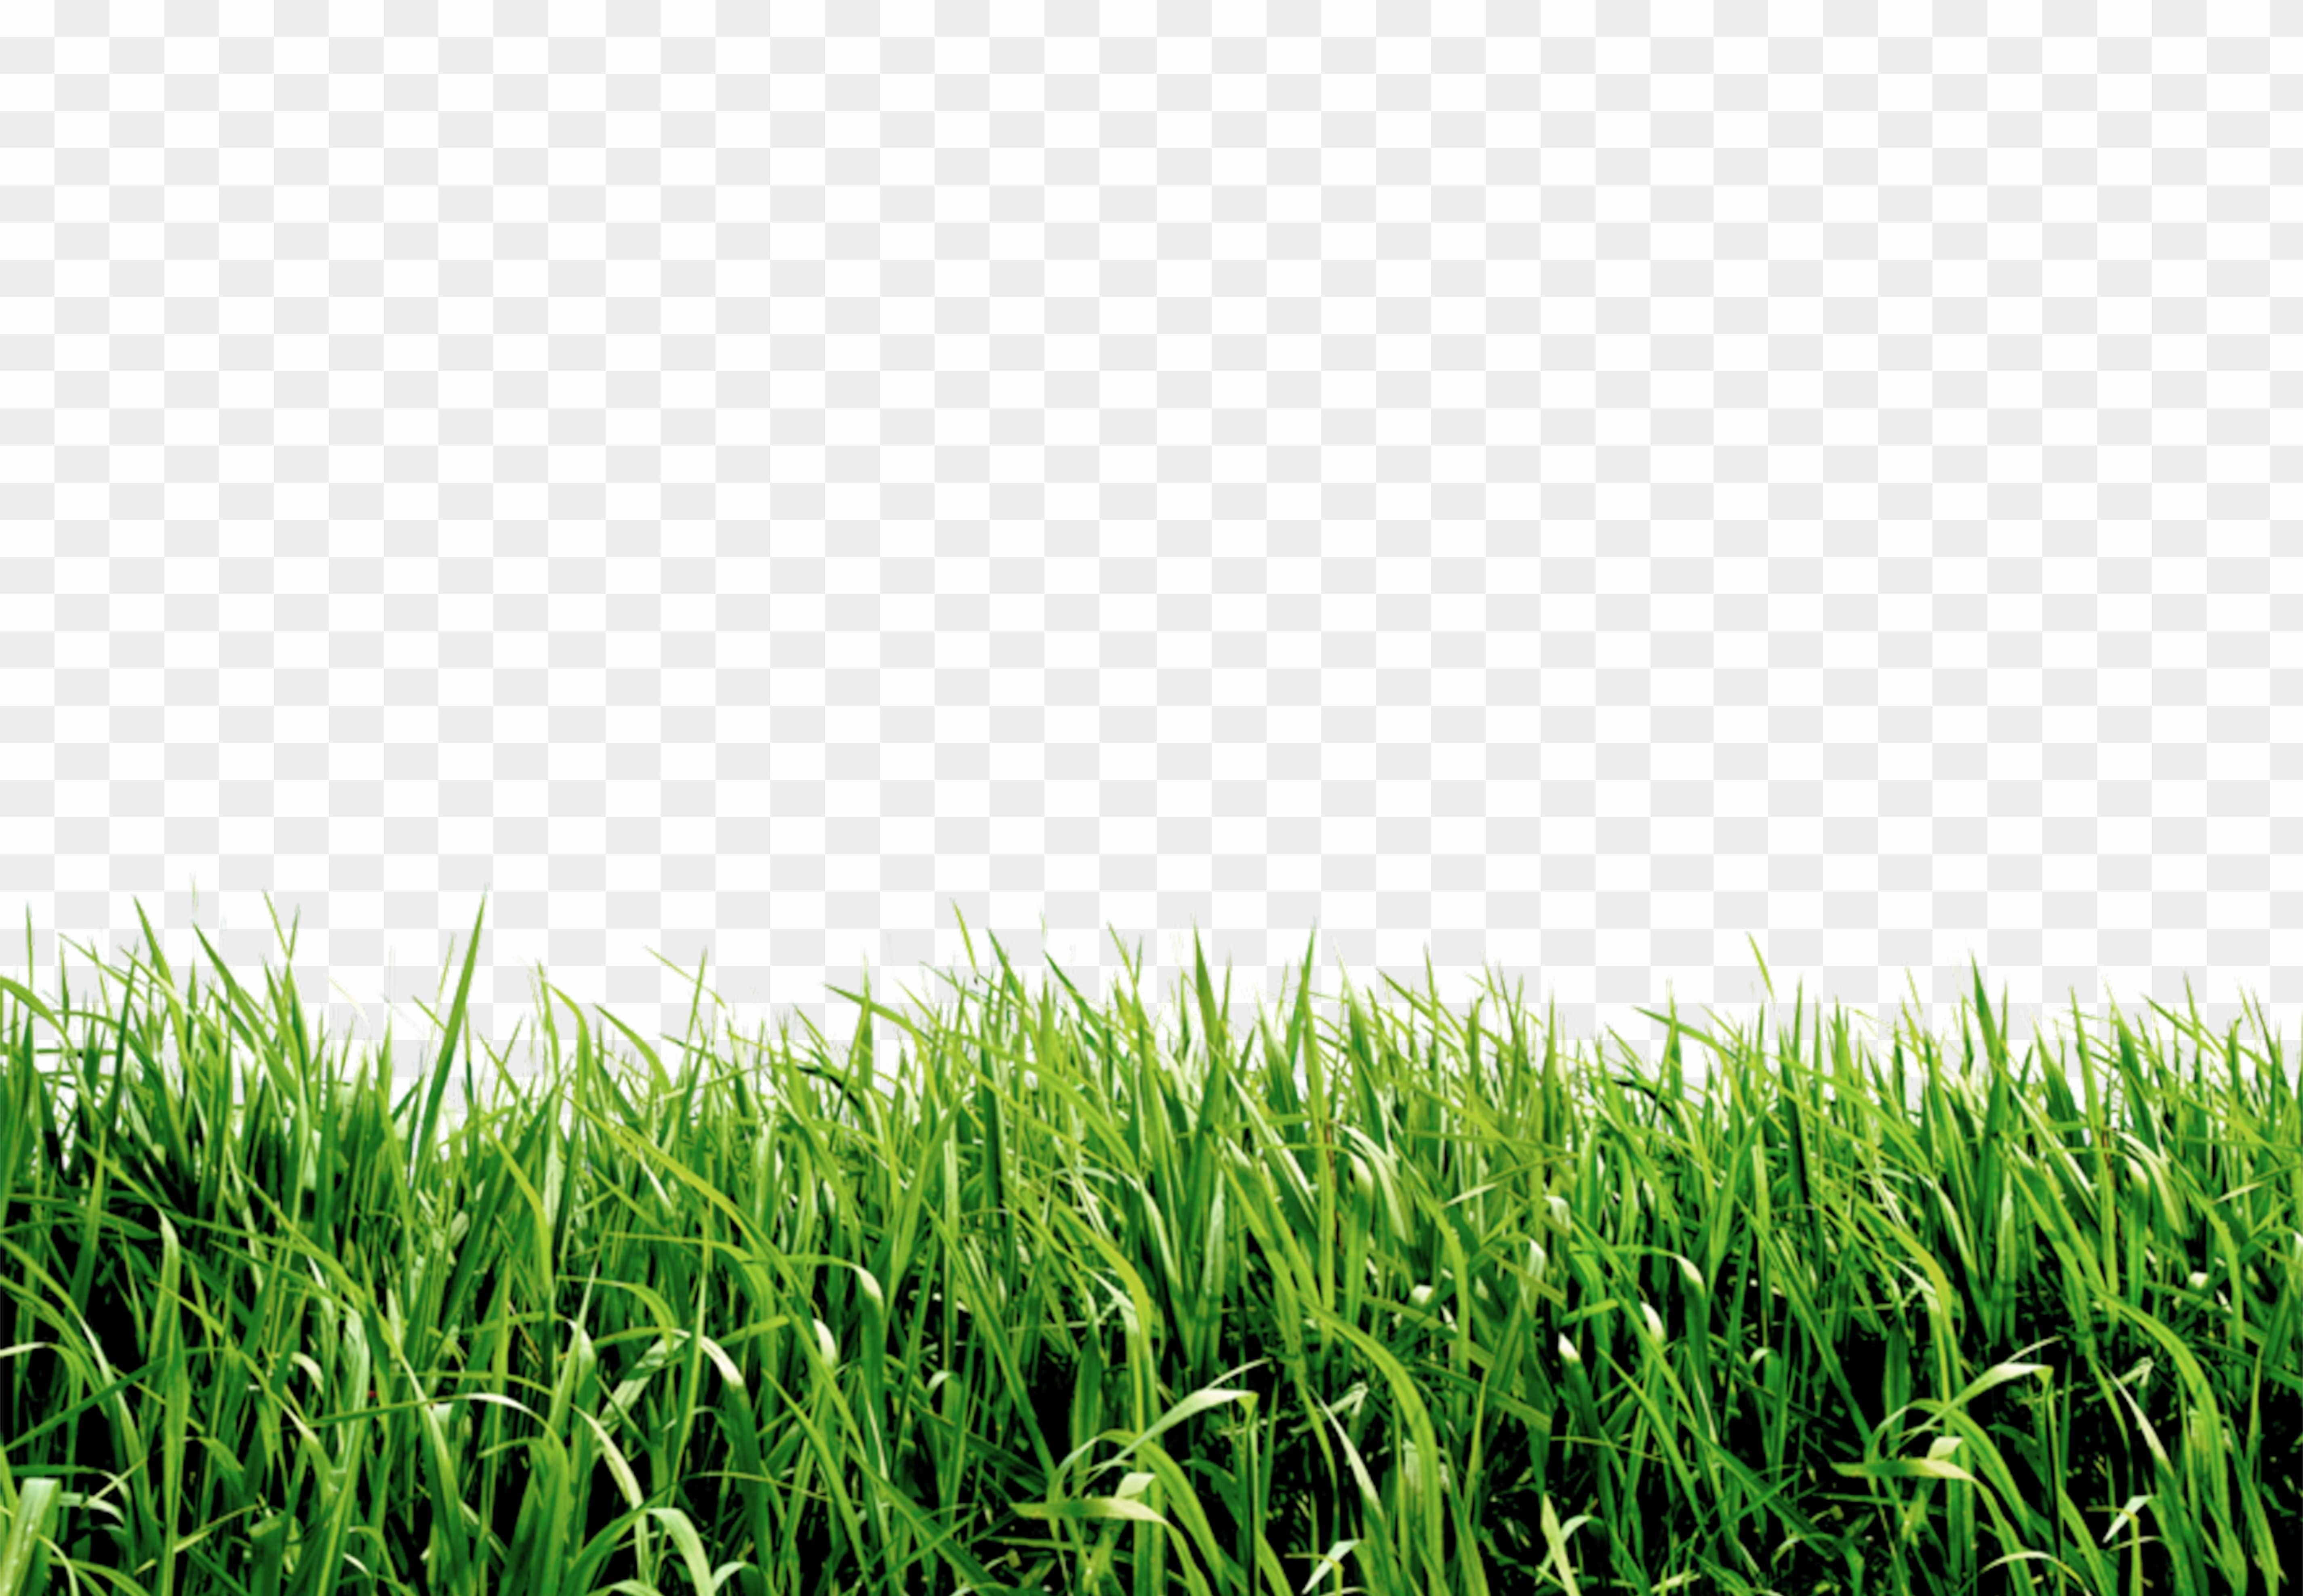 Ghas png images download_ Grass png